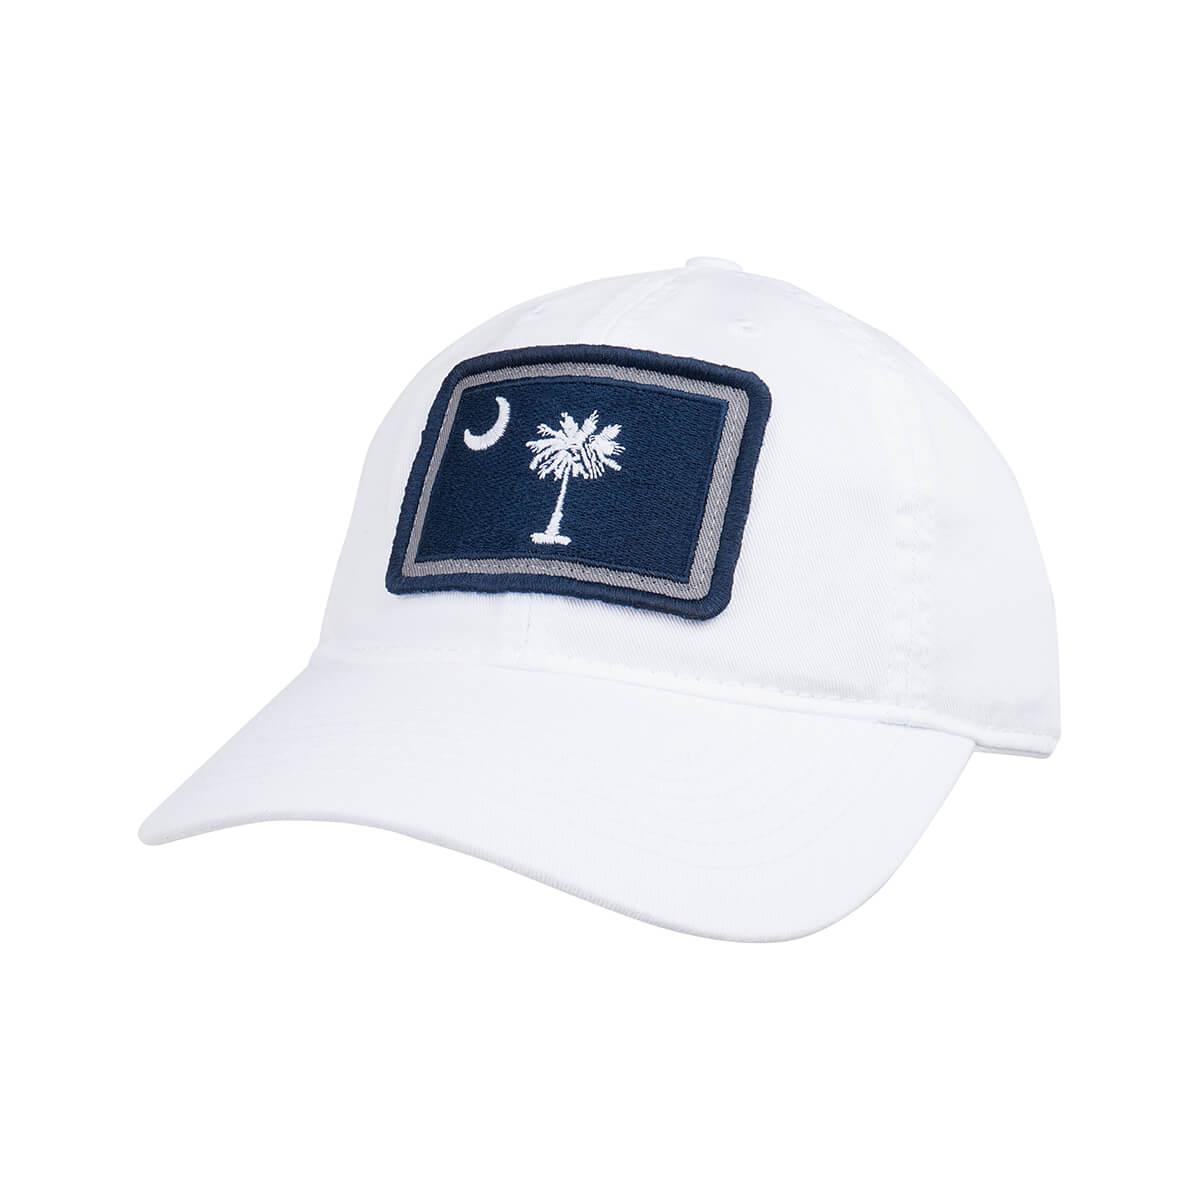 South Carolina SC Palmetto Crescent Moon Blue Washed Embroidered Ball Cap Hat